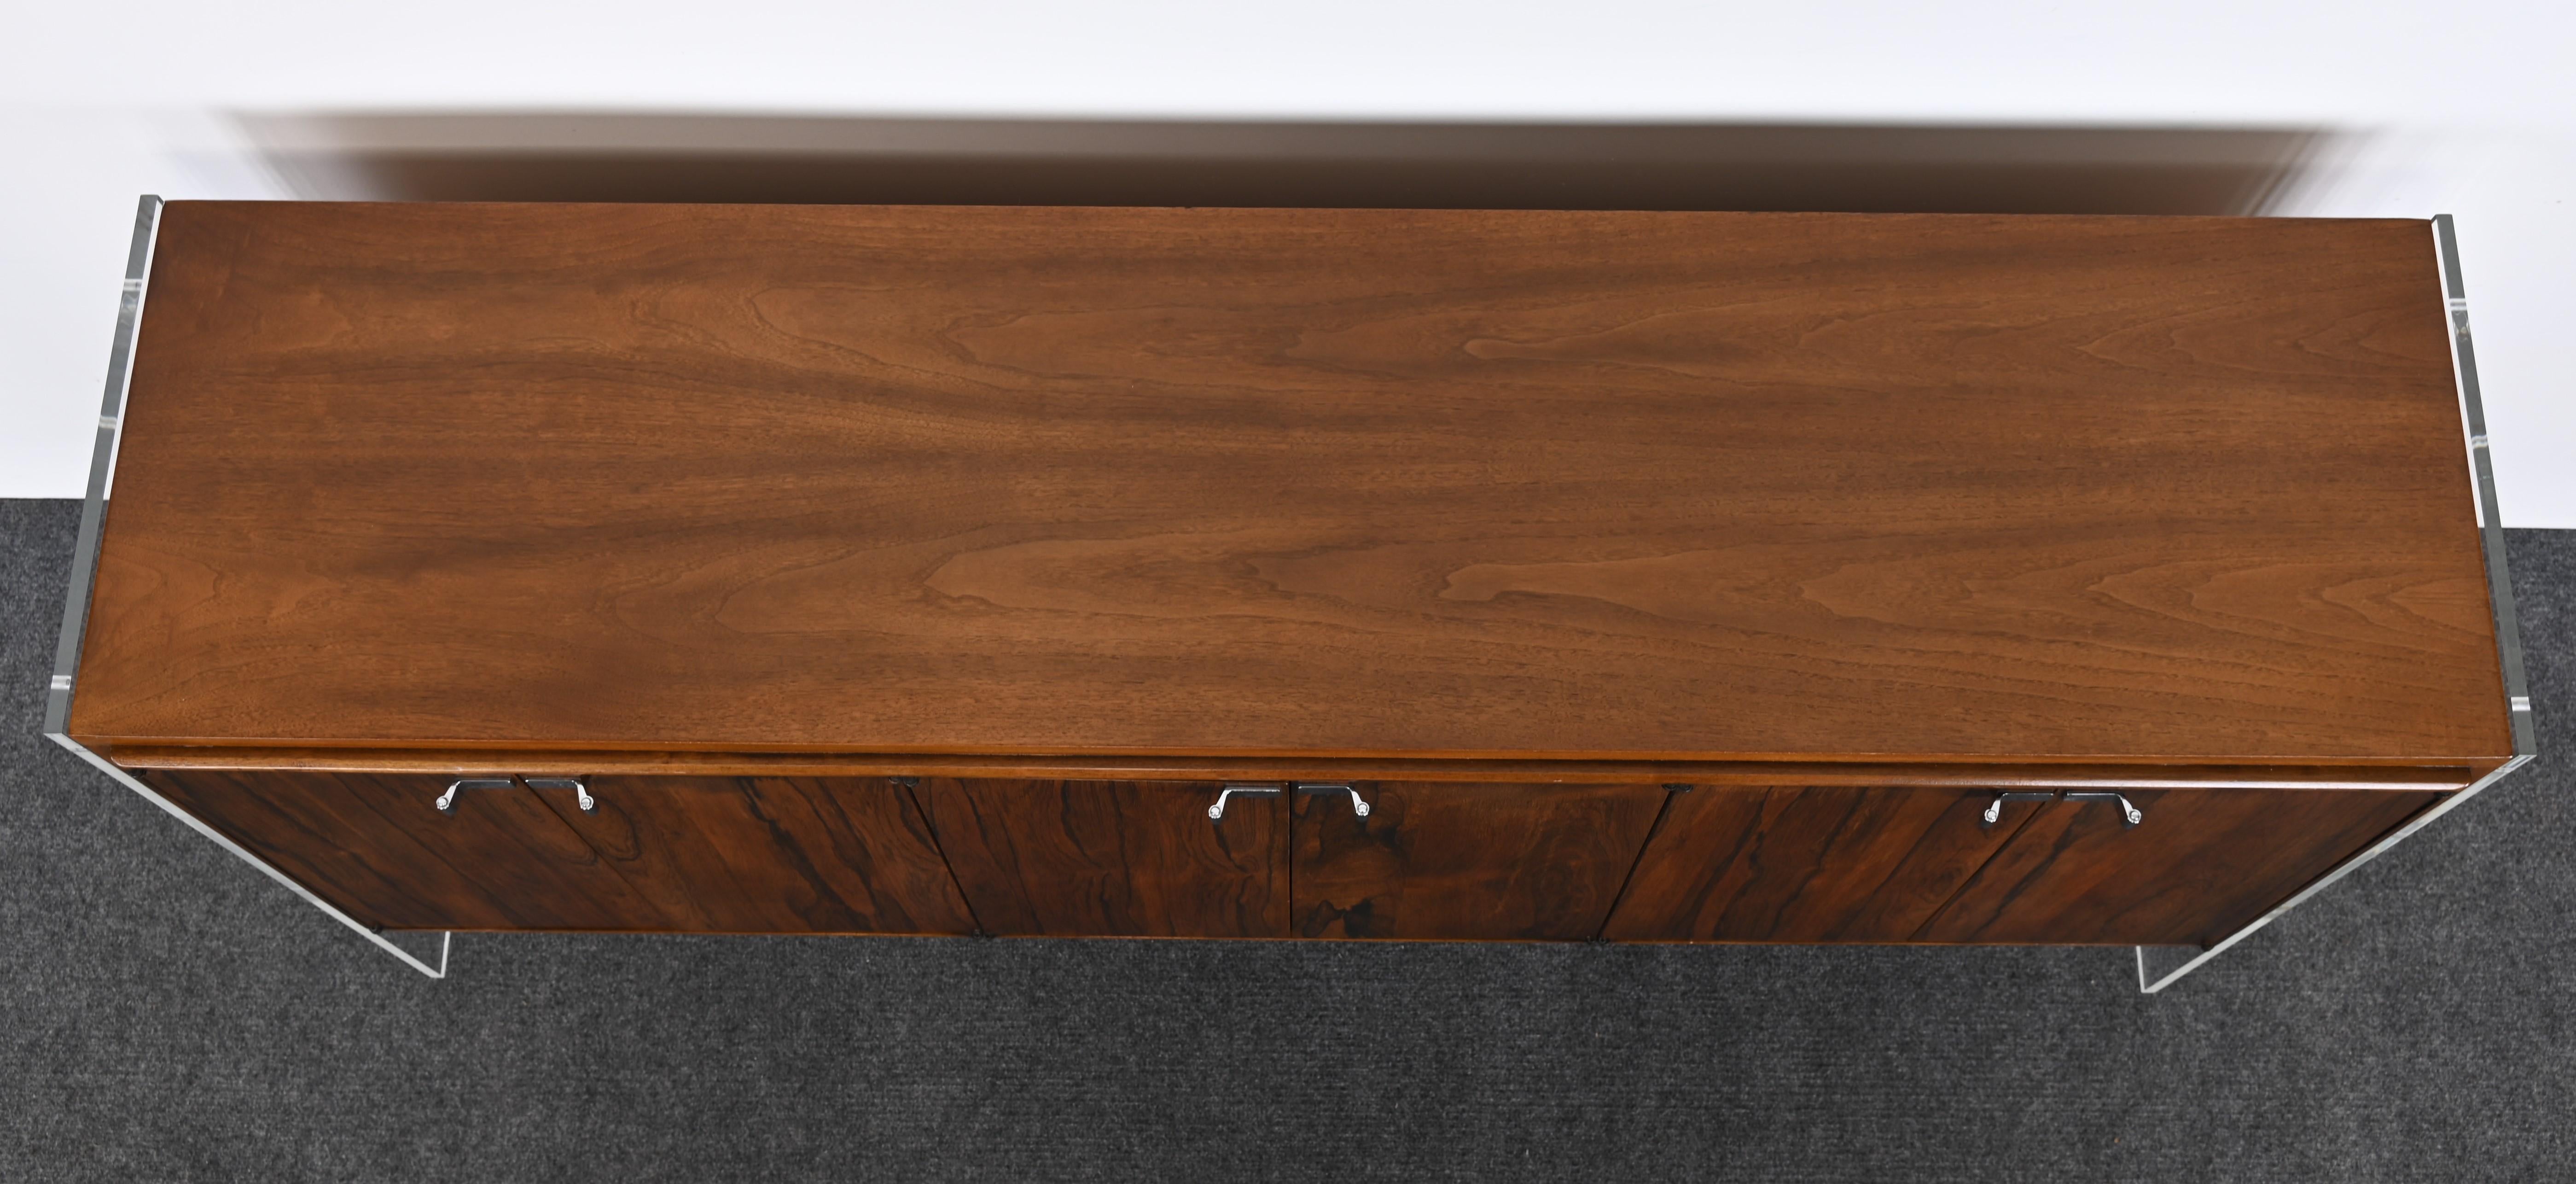 Mid-Century Modern Lucite, Walnut, and Rosewood Credenza in the manner of Milo Baughman, 1960s